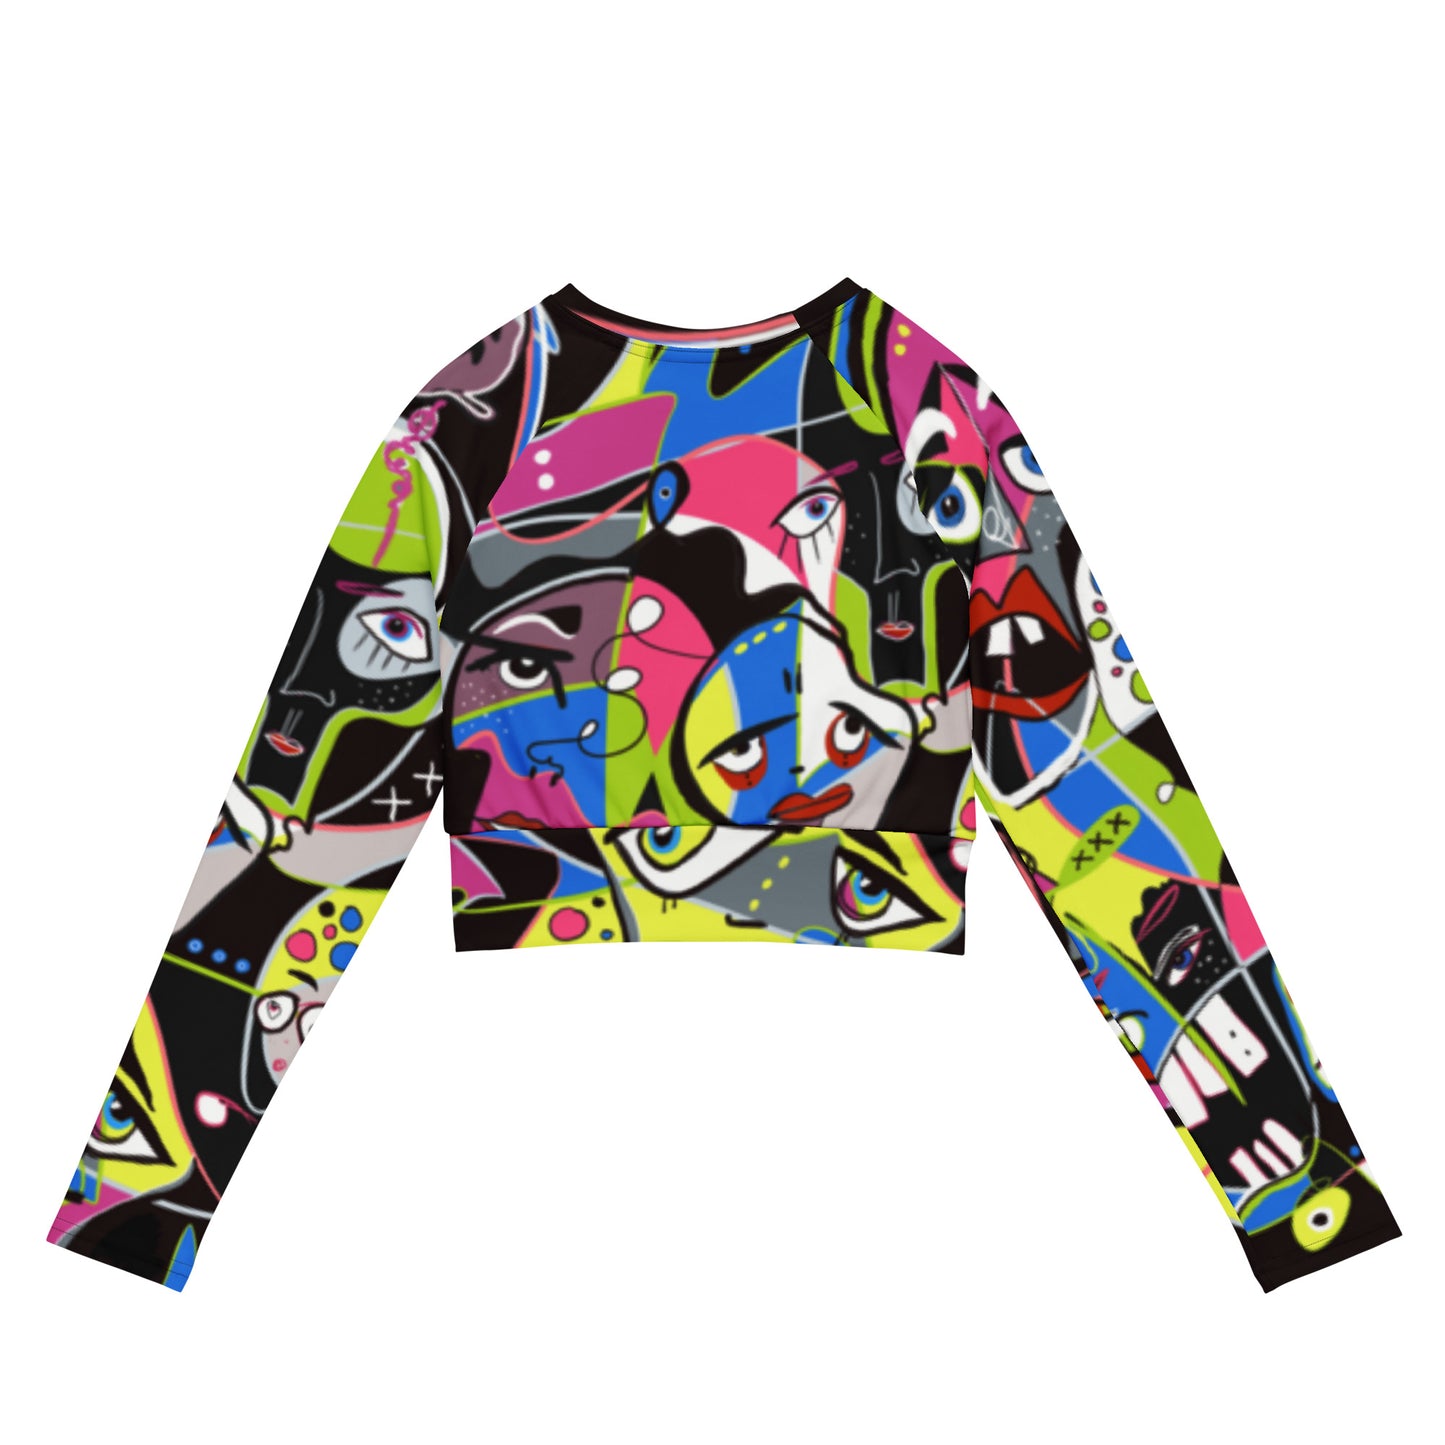 High quality recycled long-sleeve crop top